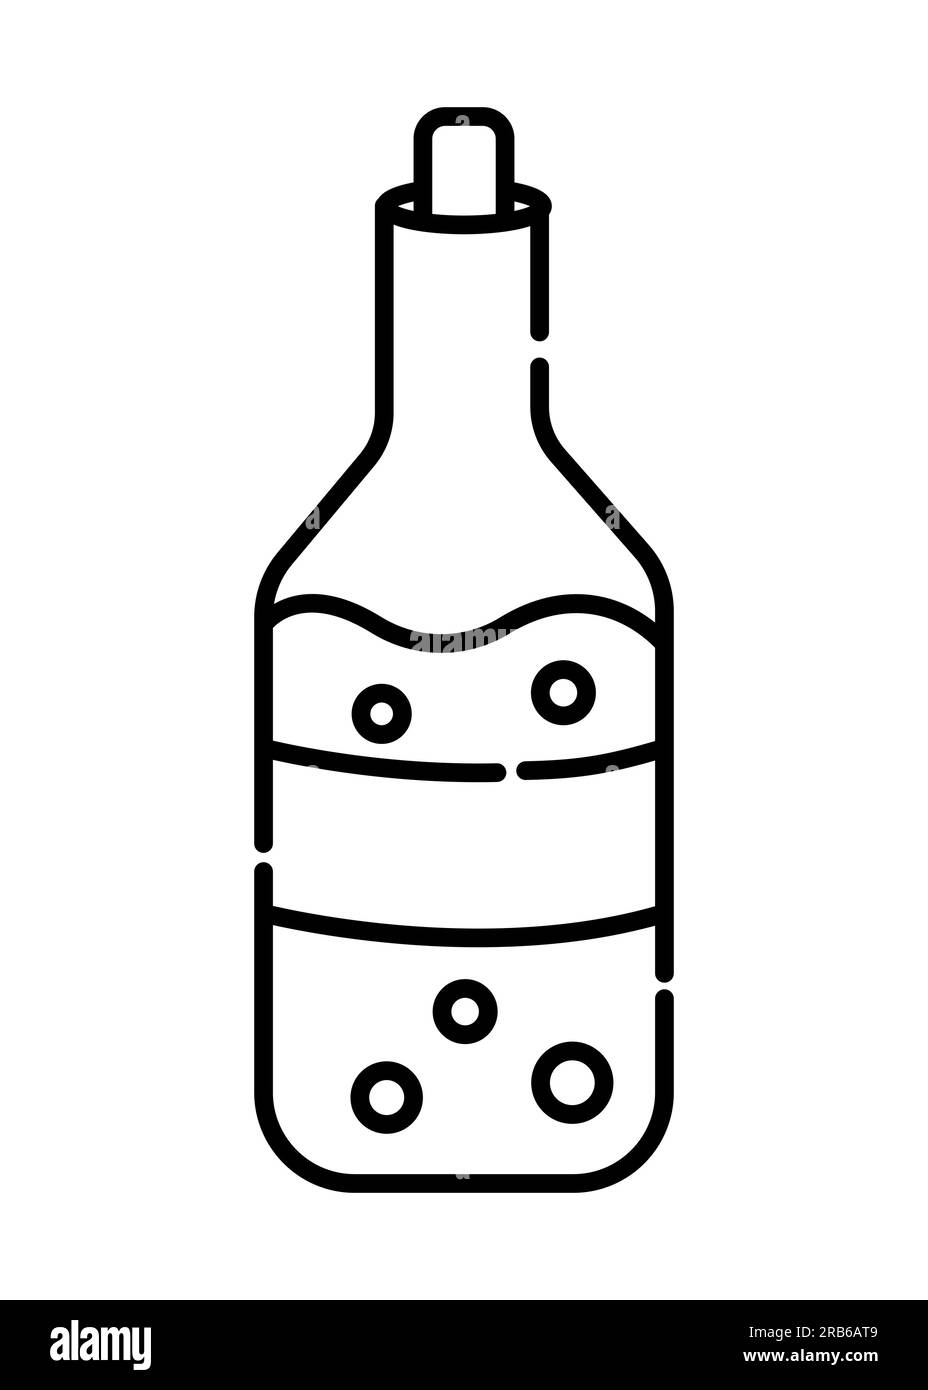 Bottle of drink black and white vector line icon Stock Vector